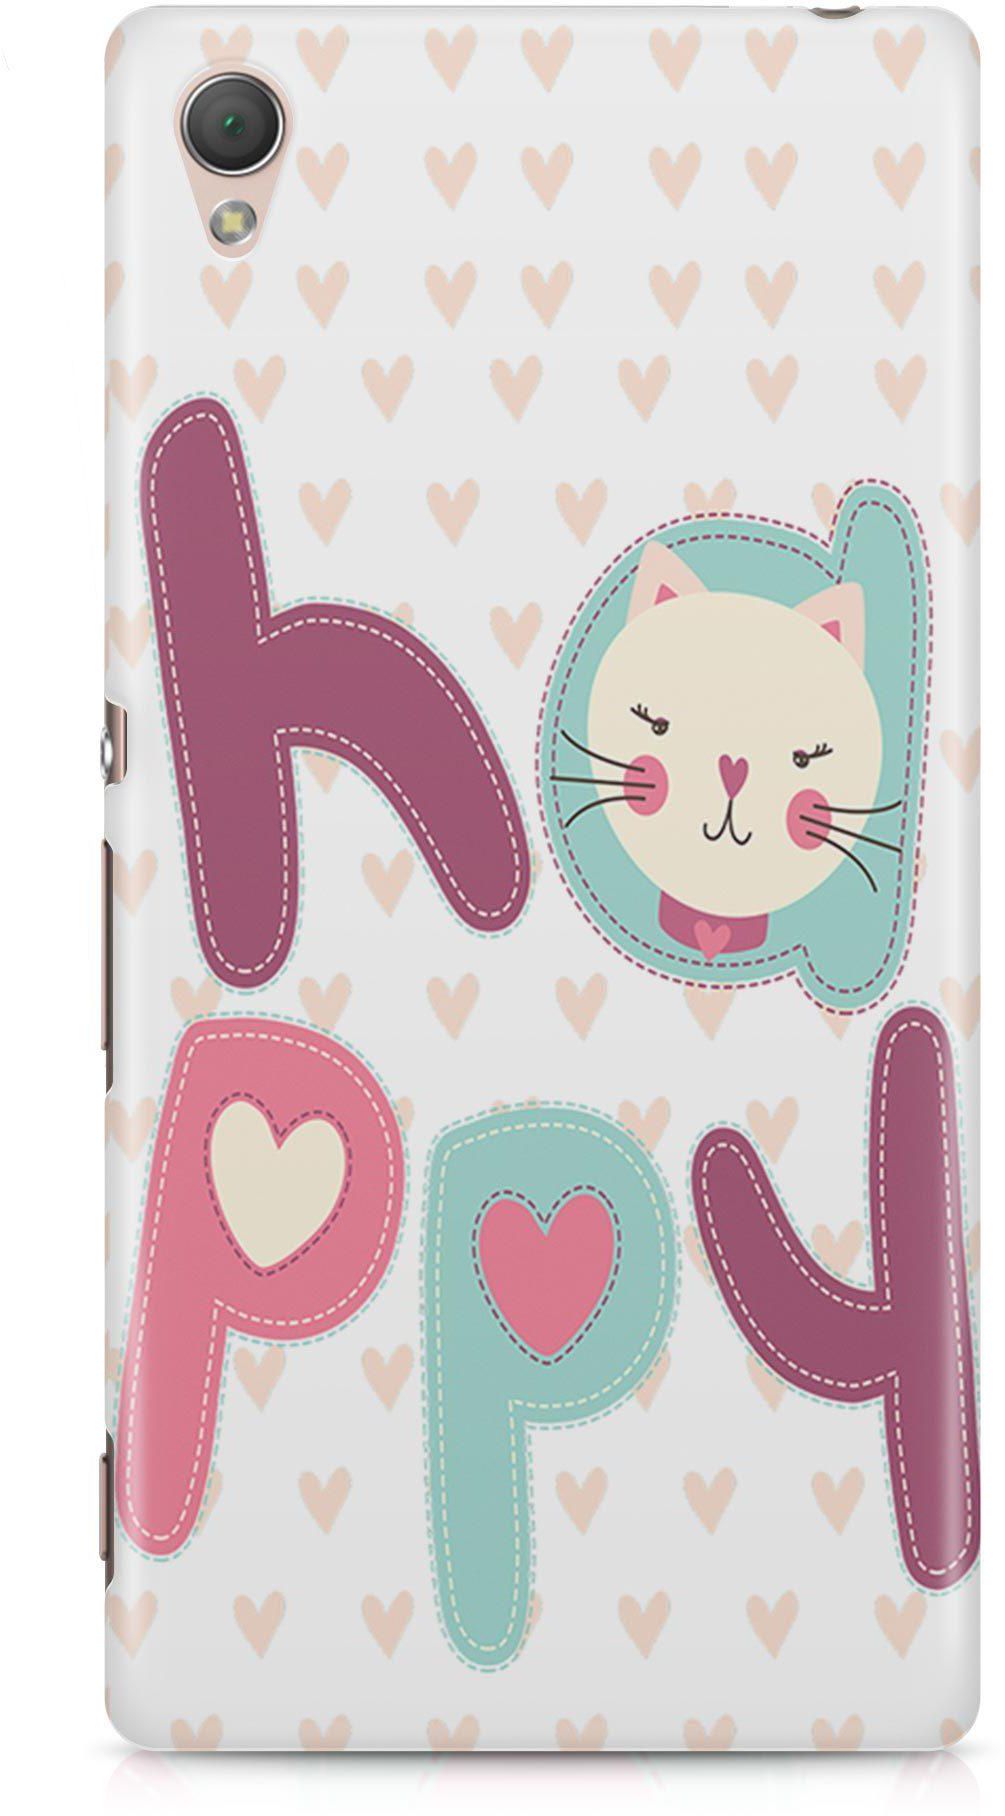 Happy Cat Case With Love Hearts Phone Cover (Covers the edge) for Sony Z5 Plus